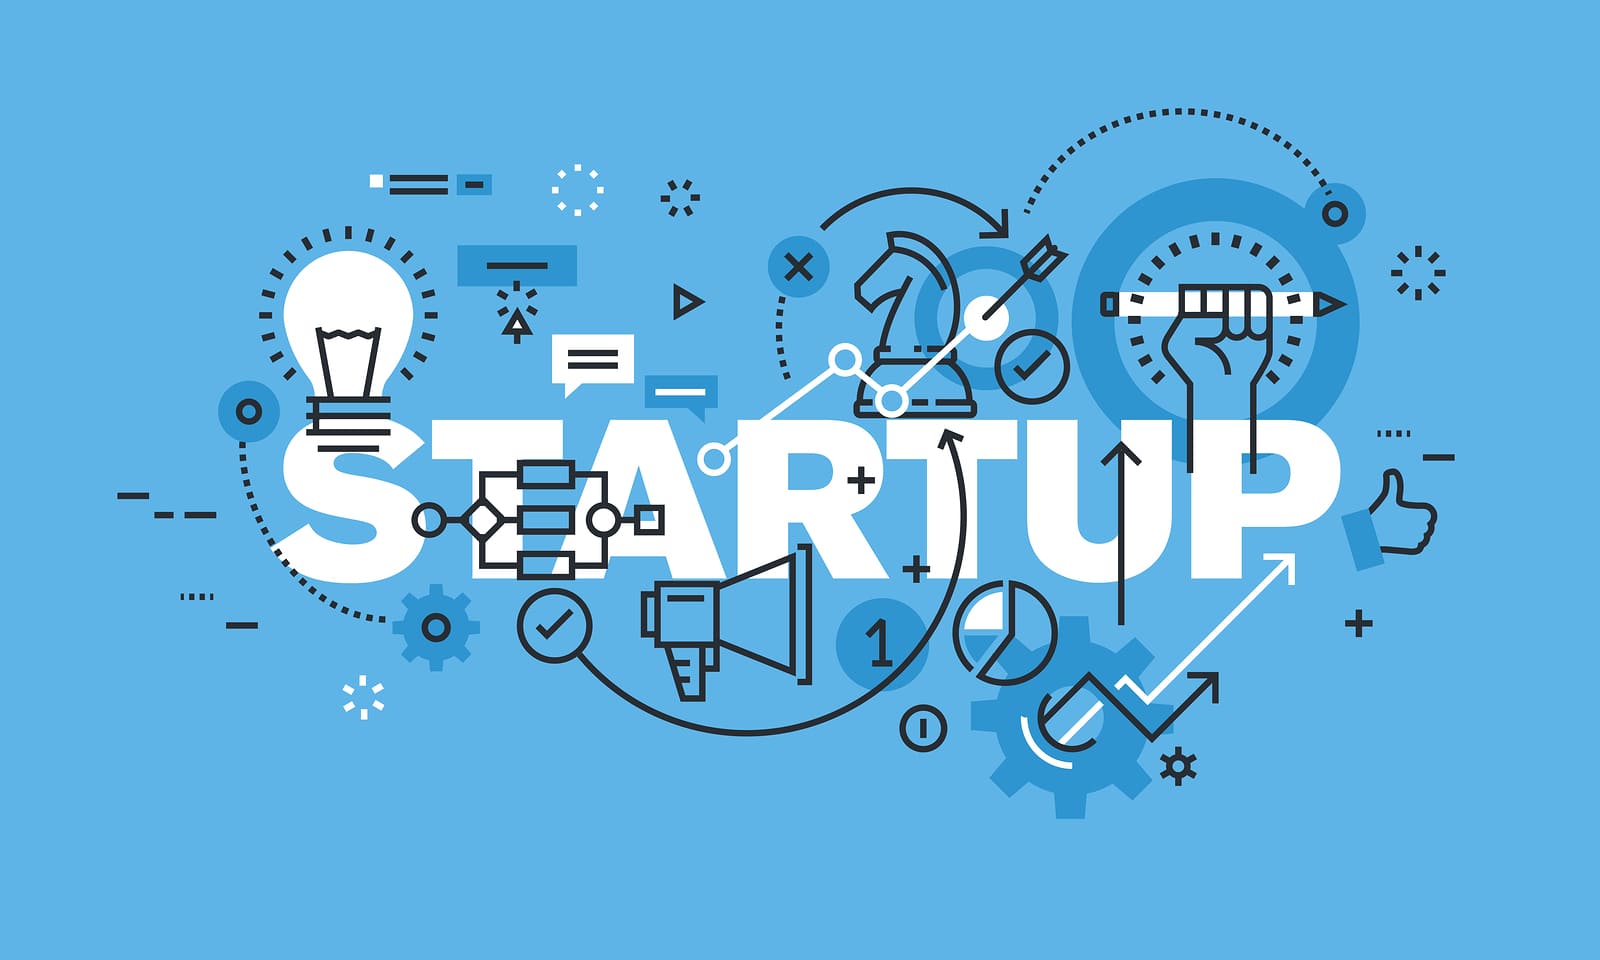 What is a startup?